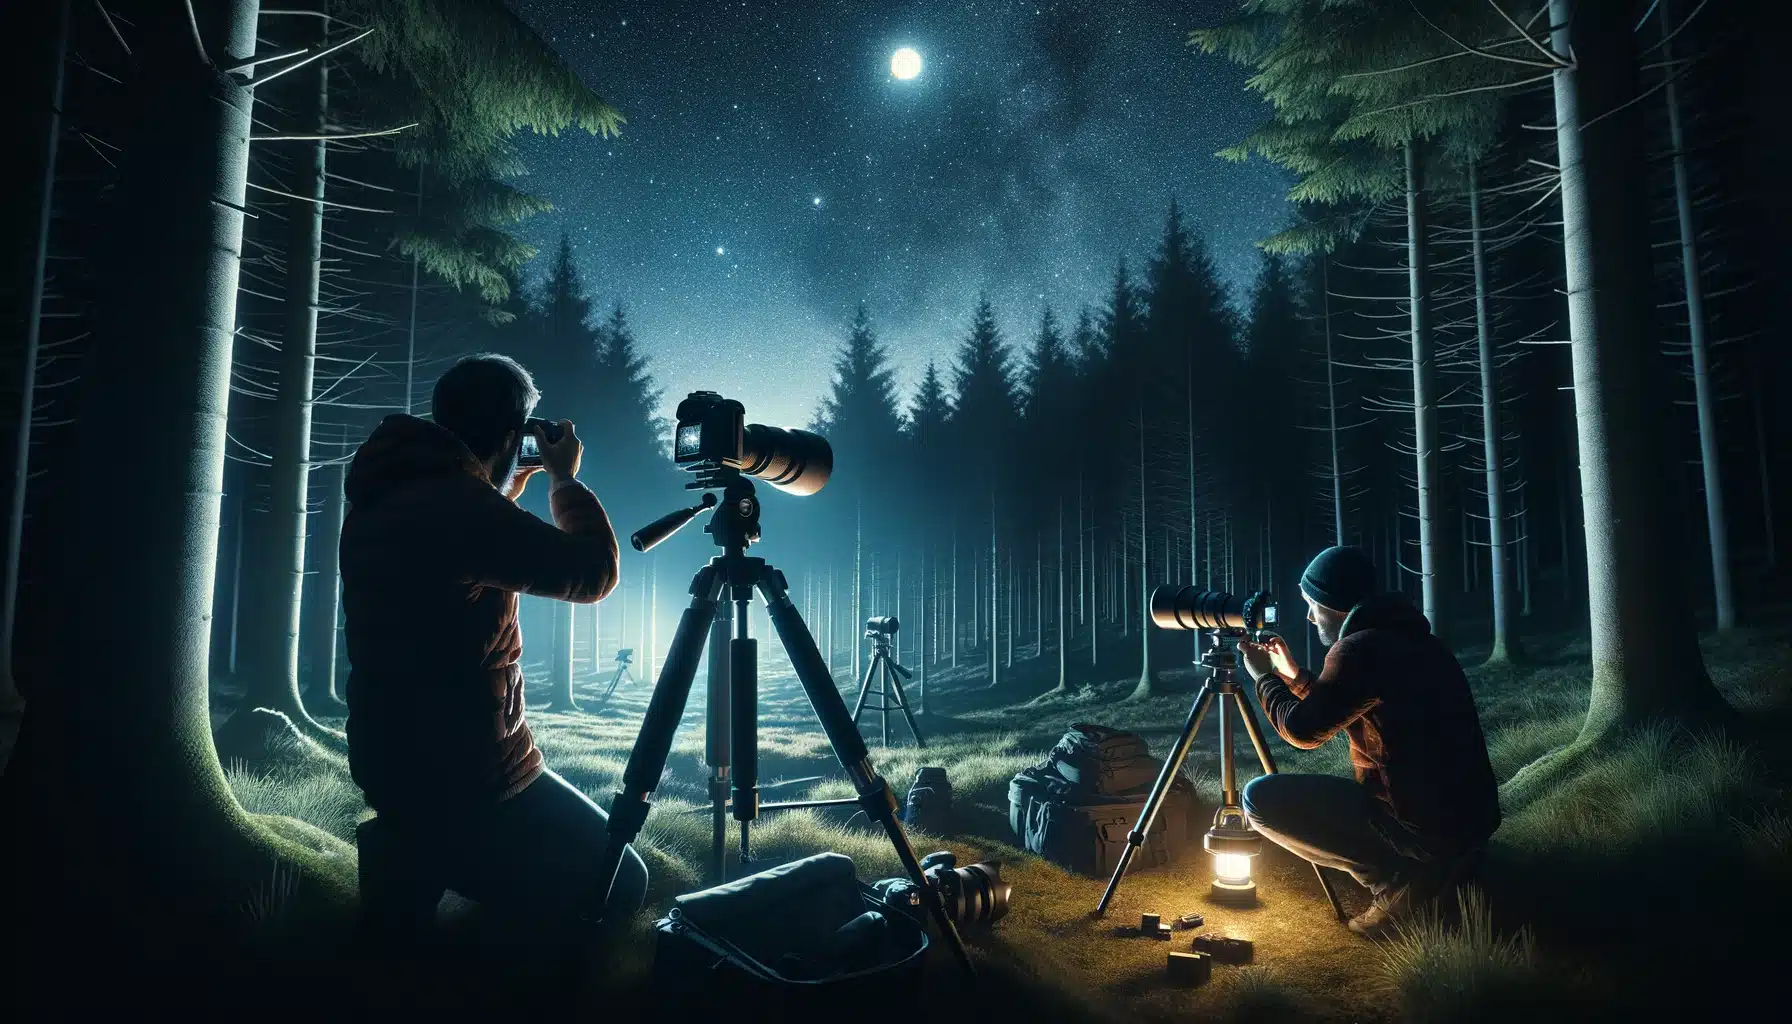 Two people engaged in cosmology in a forest at night, with one capturing the sky on a tripod and the other adjusting camera settings, surrounded by trees under a starry sky.